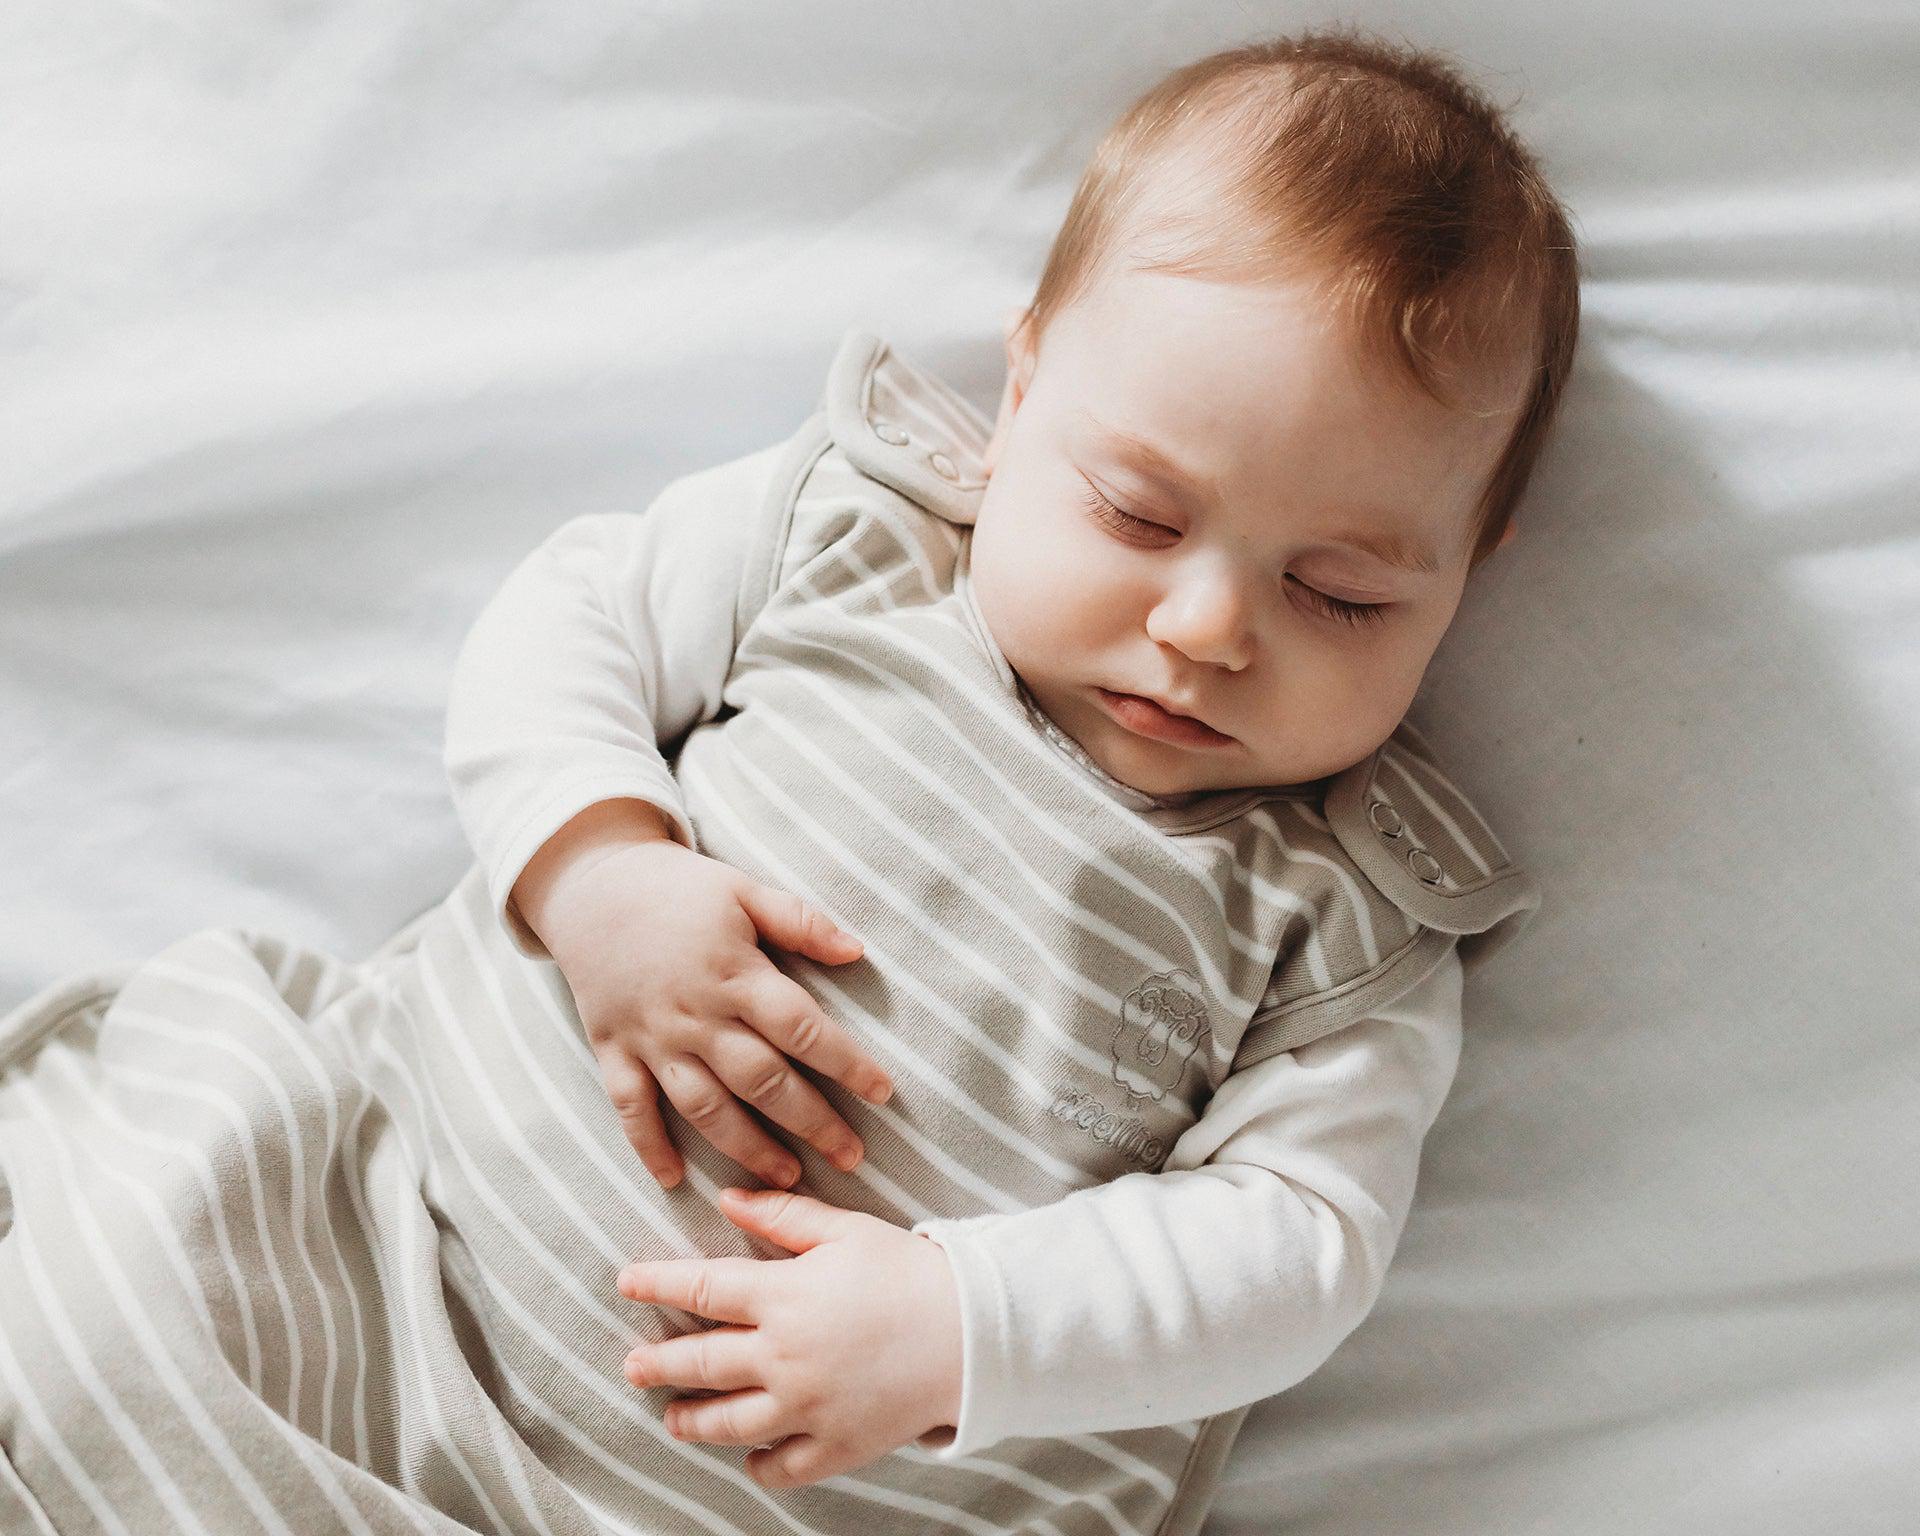 Why Is My 4 Month-Old Not Sleeping?